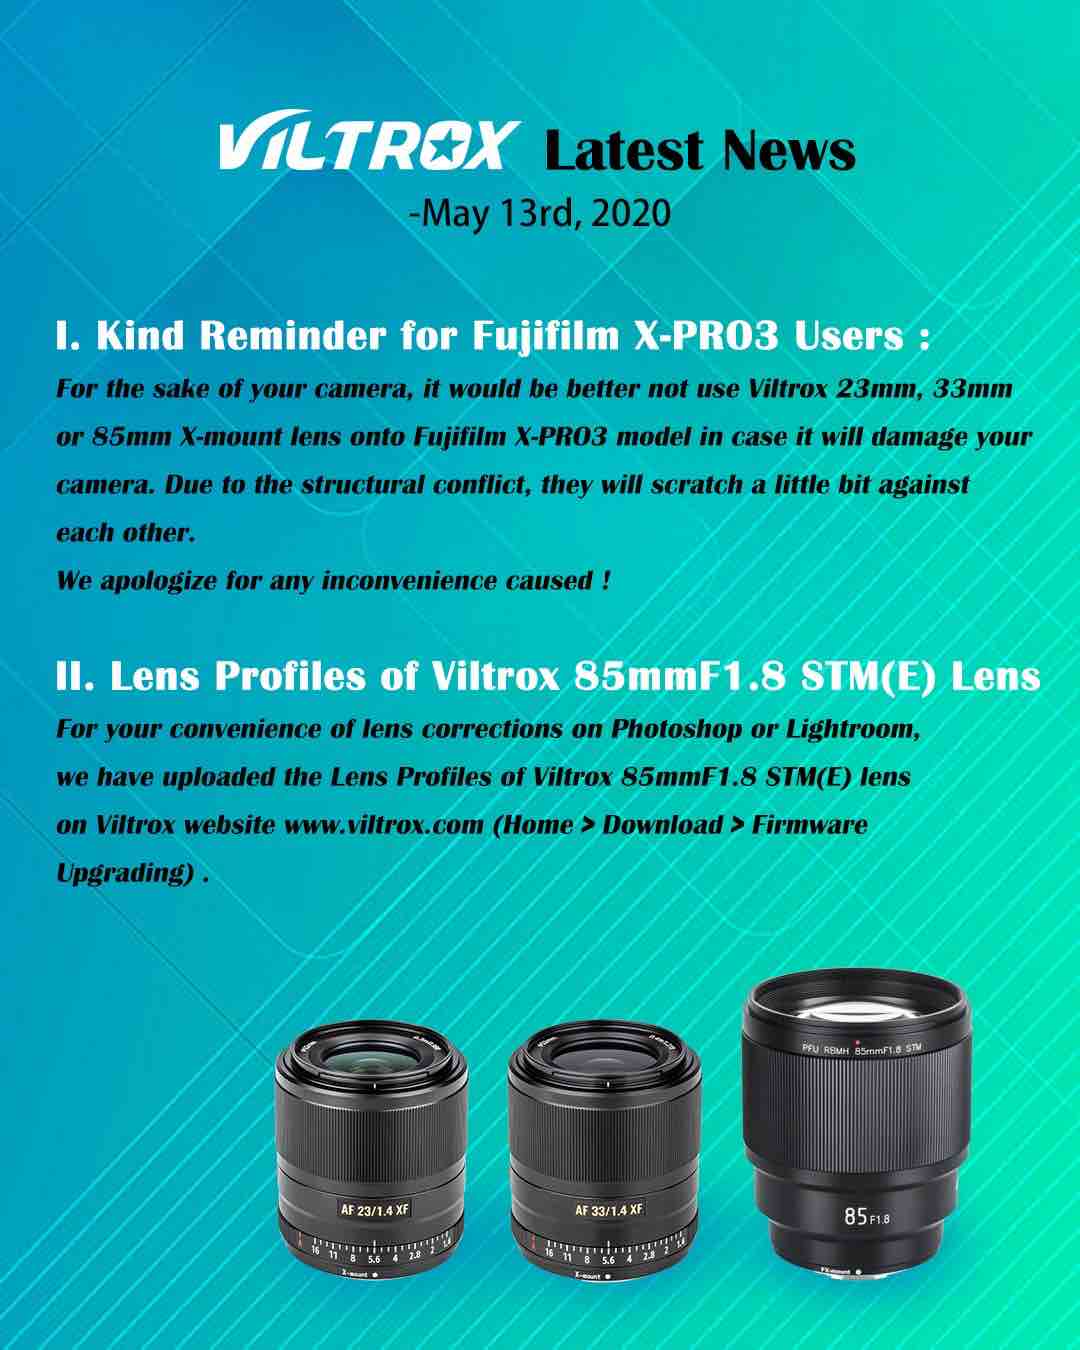 WARNING: Viltrox Lenses Can Damage Your Fujifilm X-Pro3 (Official